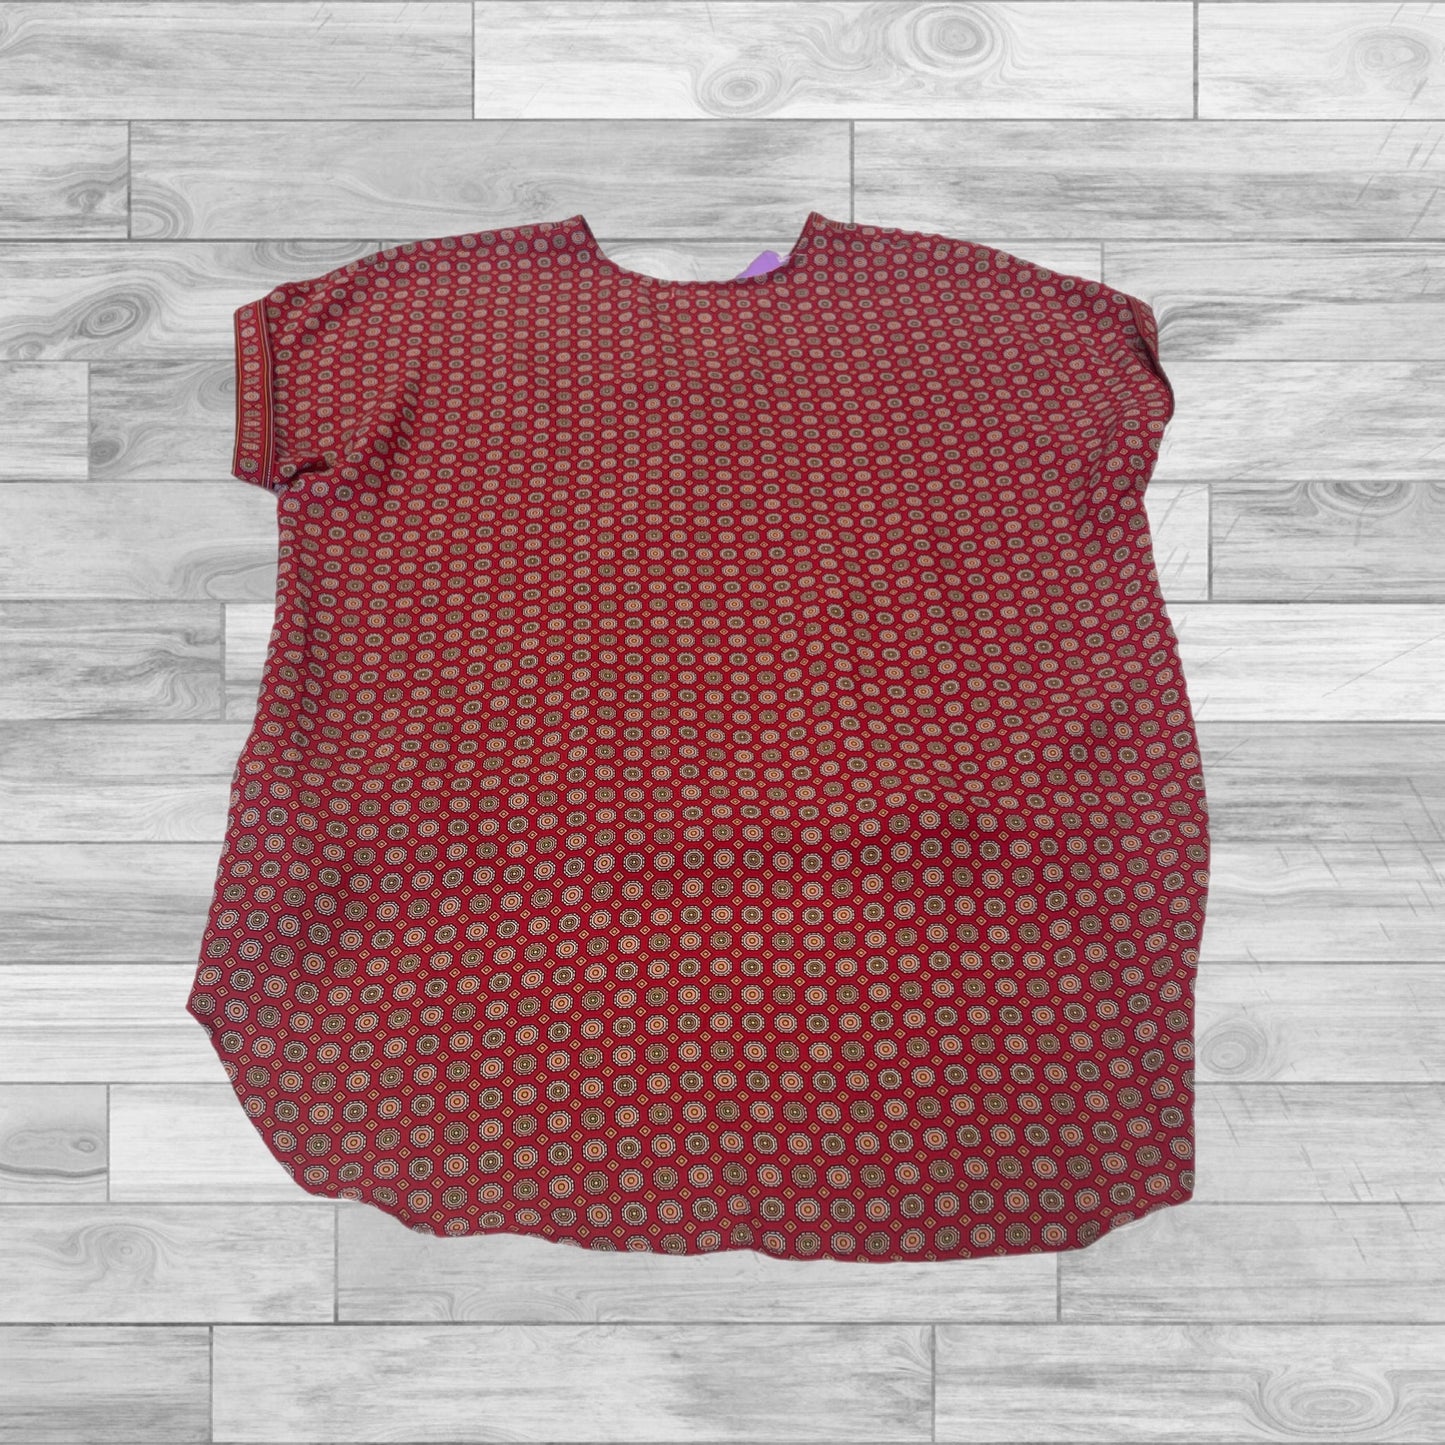 Red Top Short Sleeve Max Studio, Size S